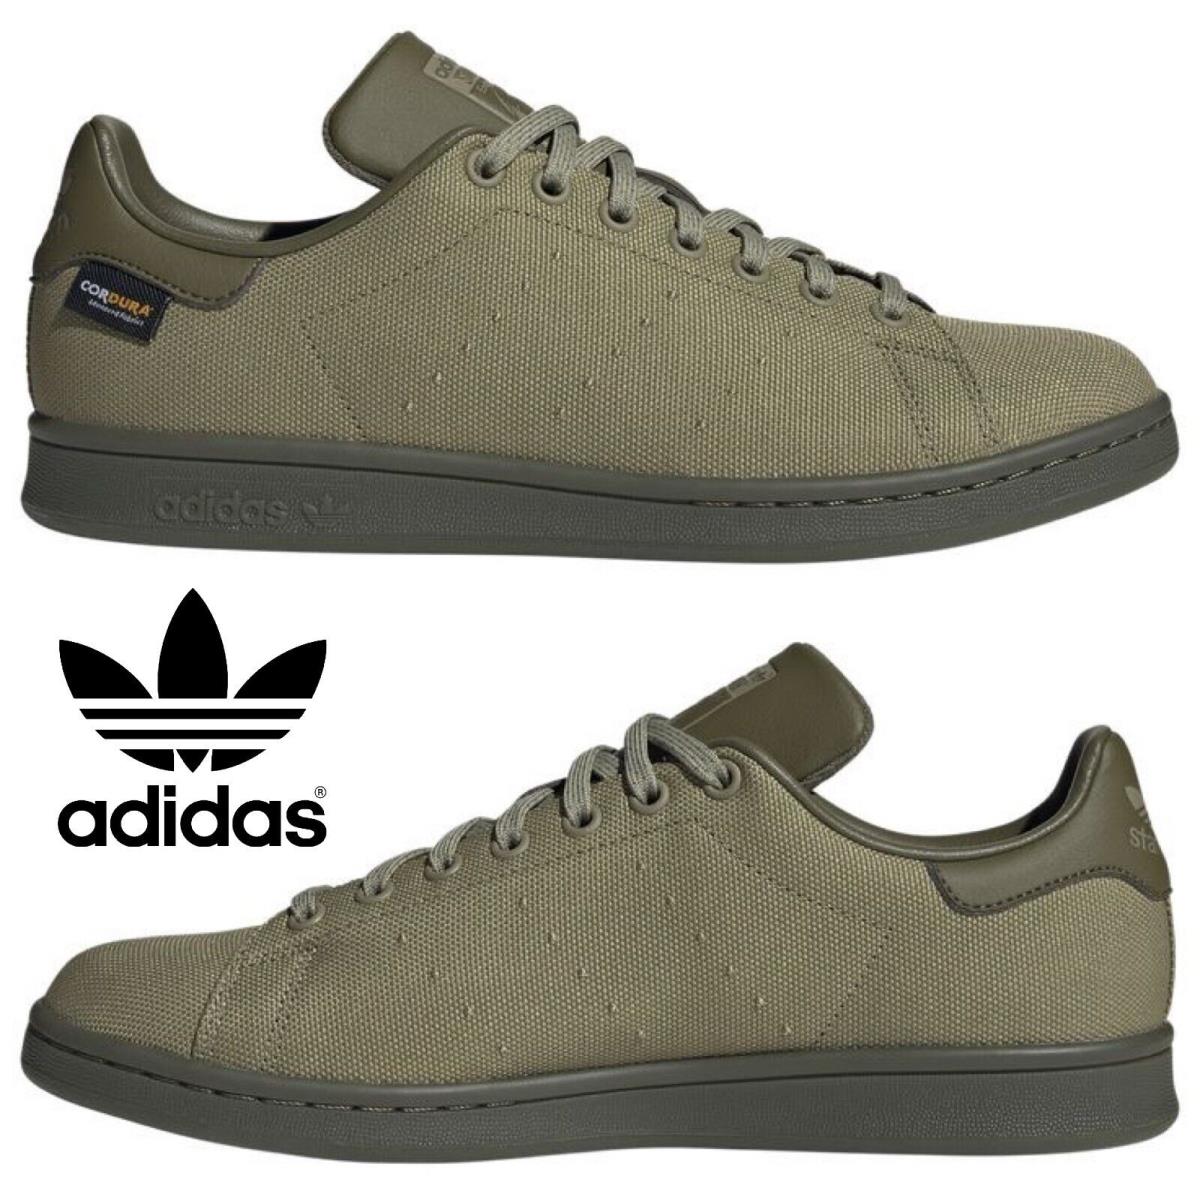 Adidas Originals Stan Smith Mens Sneakers Comfort Sport Casual Shoes Green - Green, Manufacturer: Green/Olive